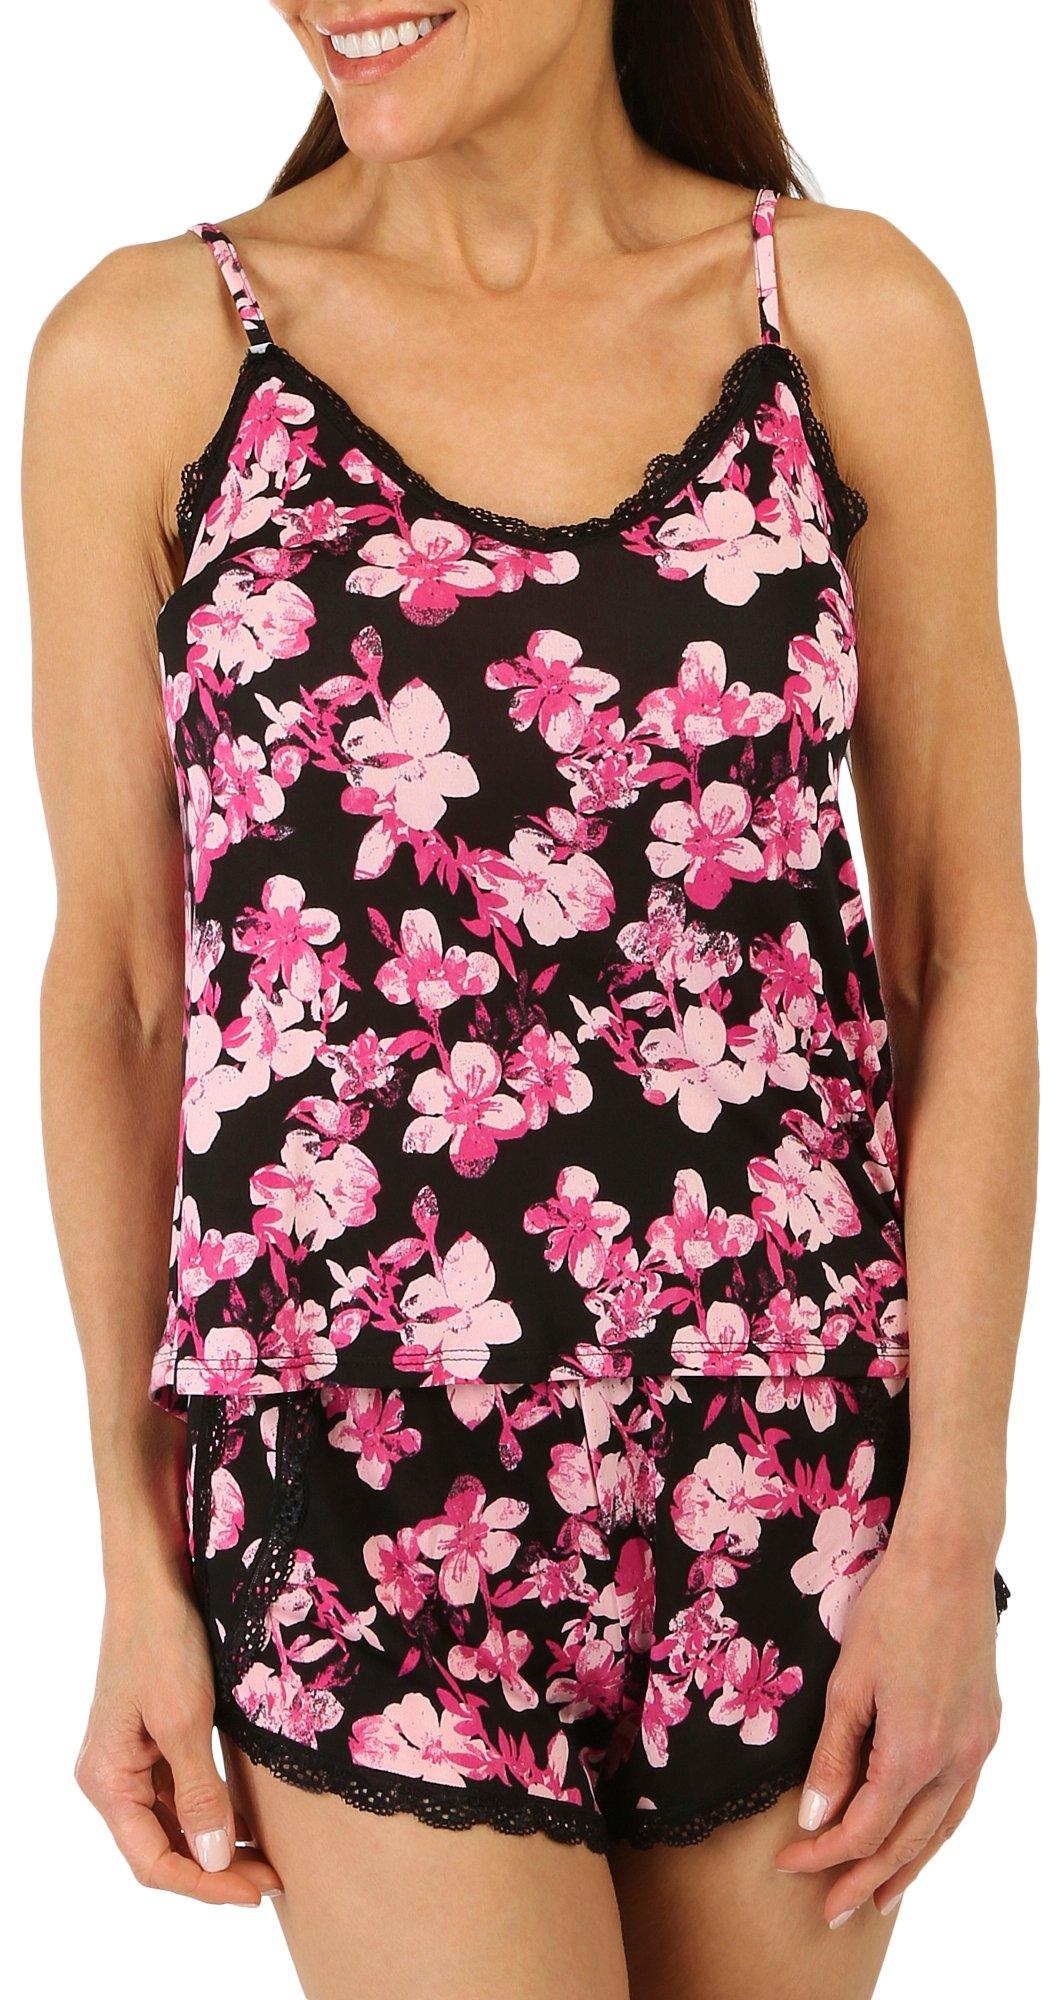 Jessica Simpson Womens 2-Pc. Floral Cami & Shorts